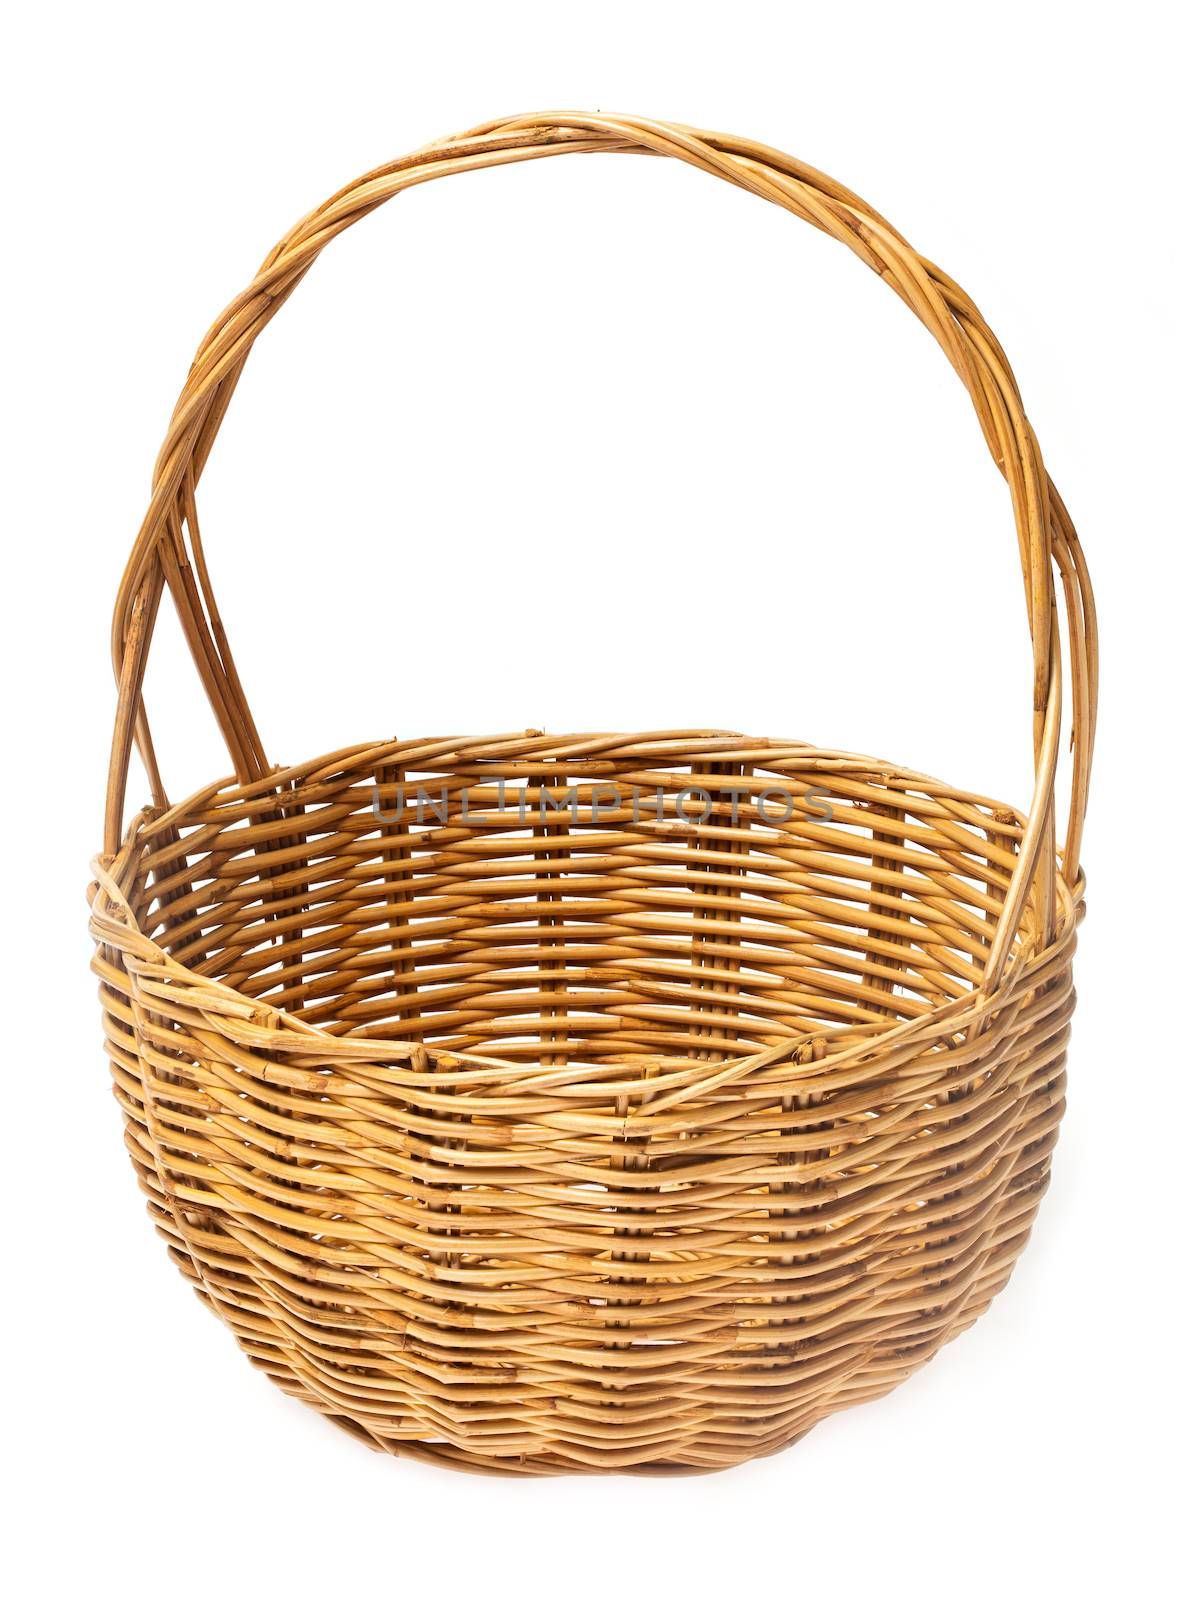 Wicker basket or rattan basket isolated on white